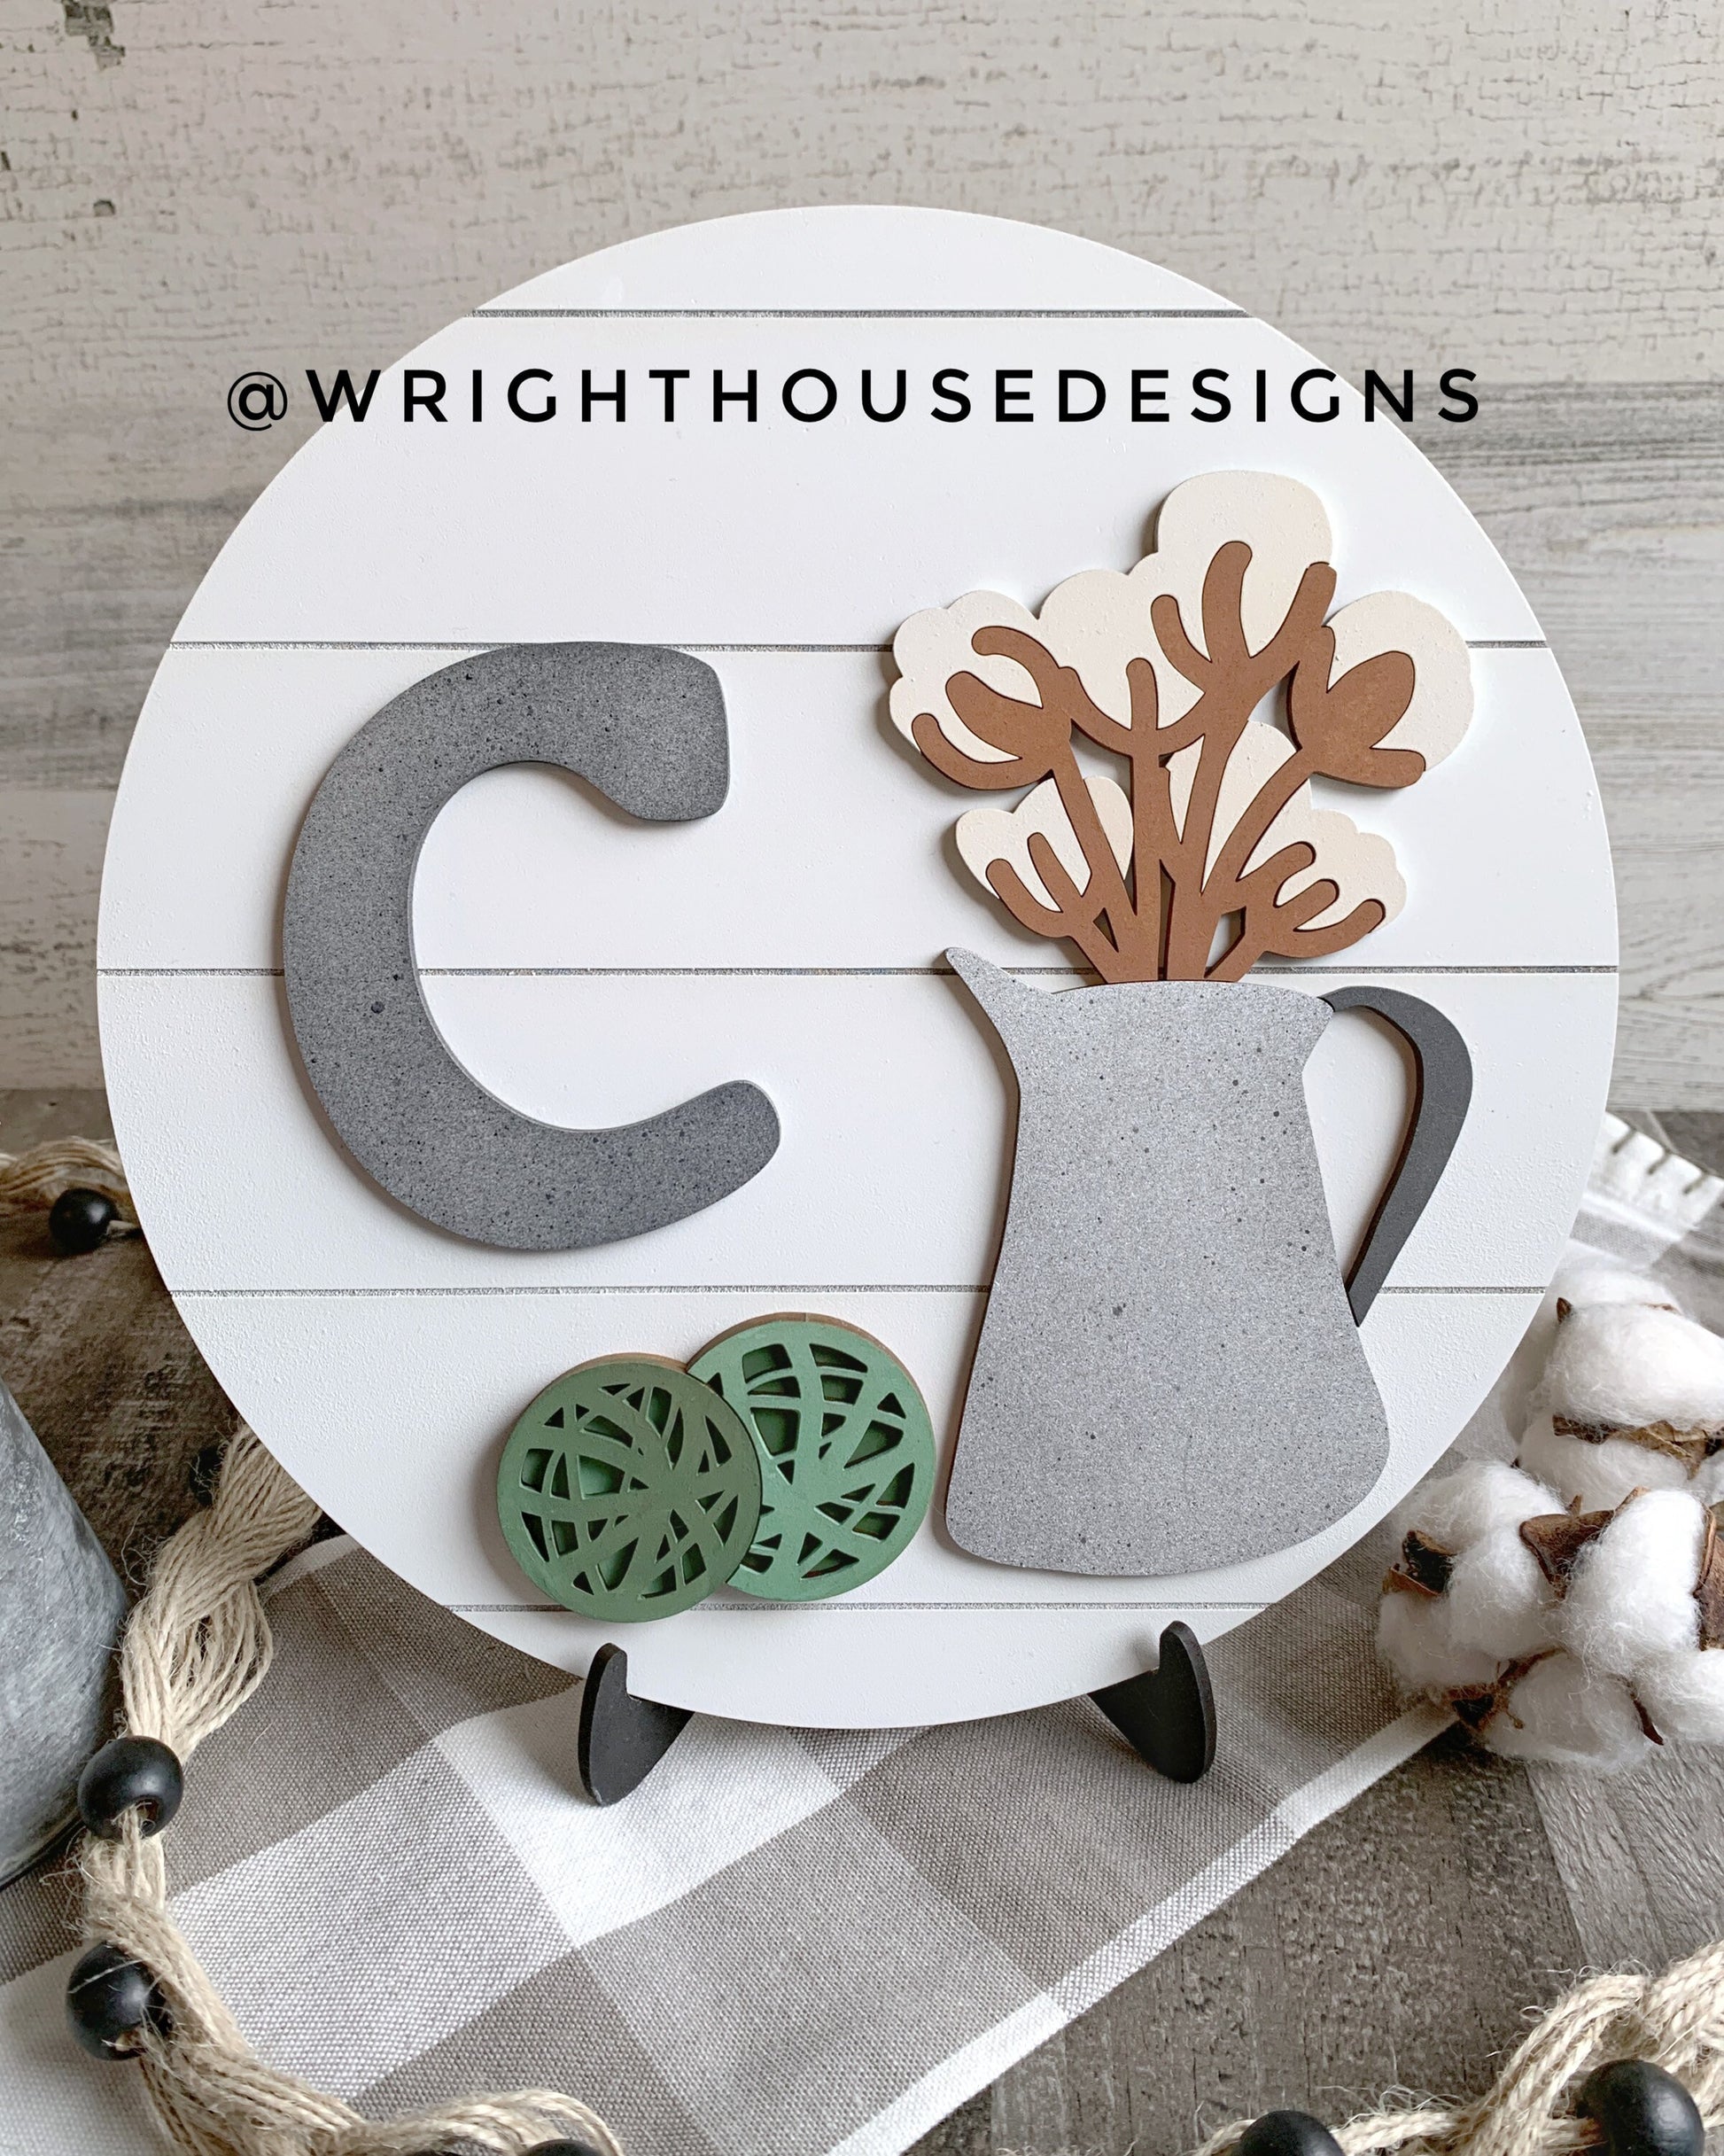 Southern Farmhouse Cotton - Galvanized Watering Can - Botanical Spheres - Personalized Monogram - Shiplap Style - Round Shelf Sitter Sign